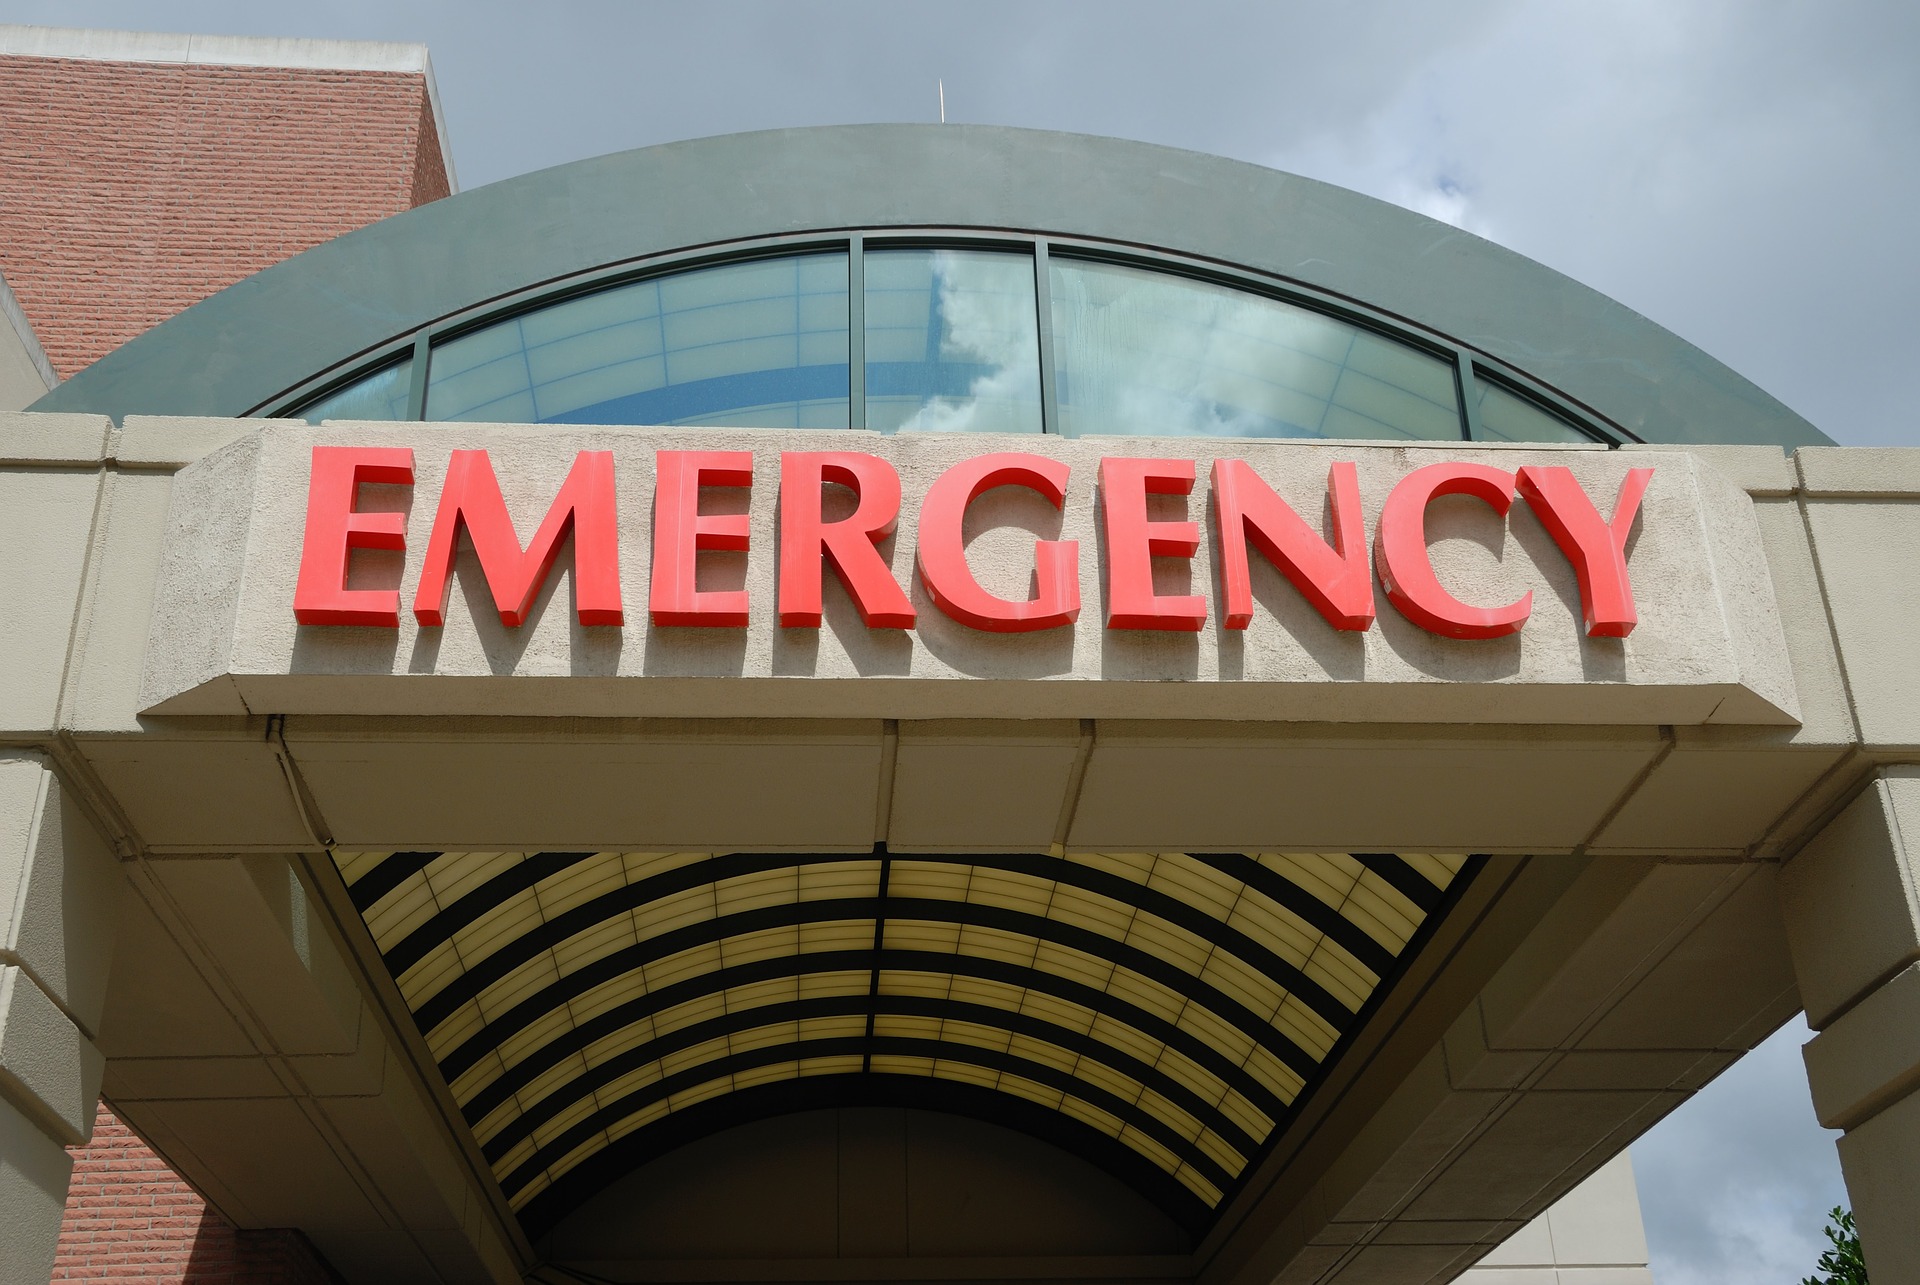 My life as an Emergency Physician